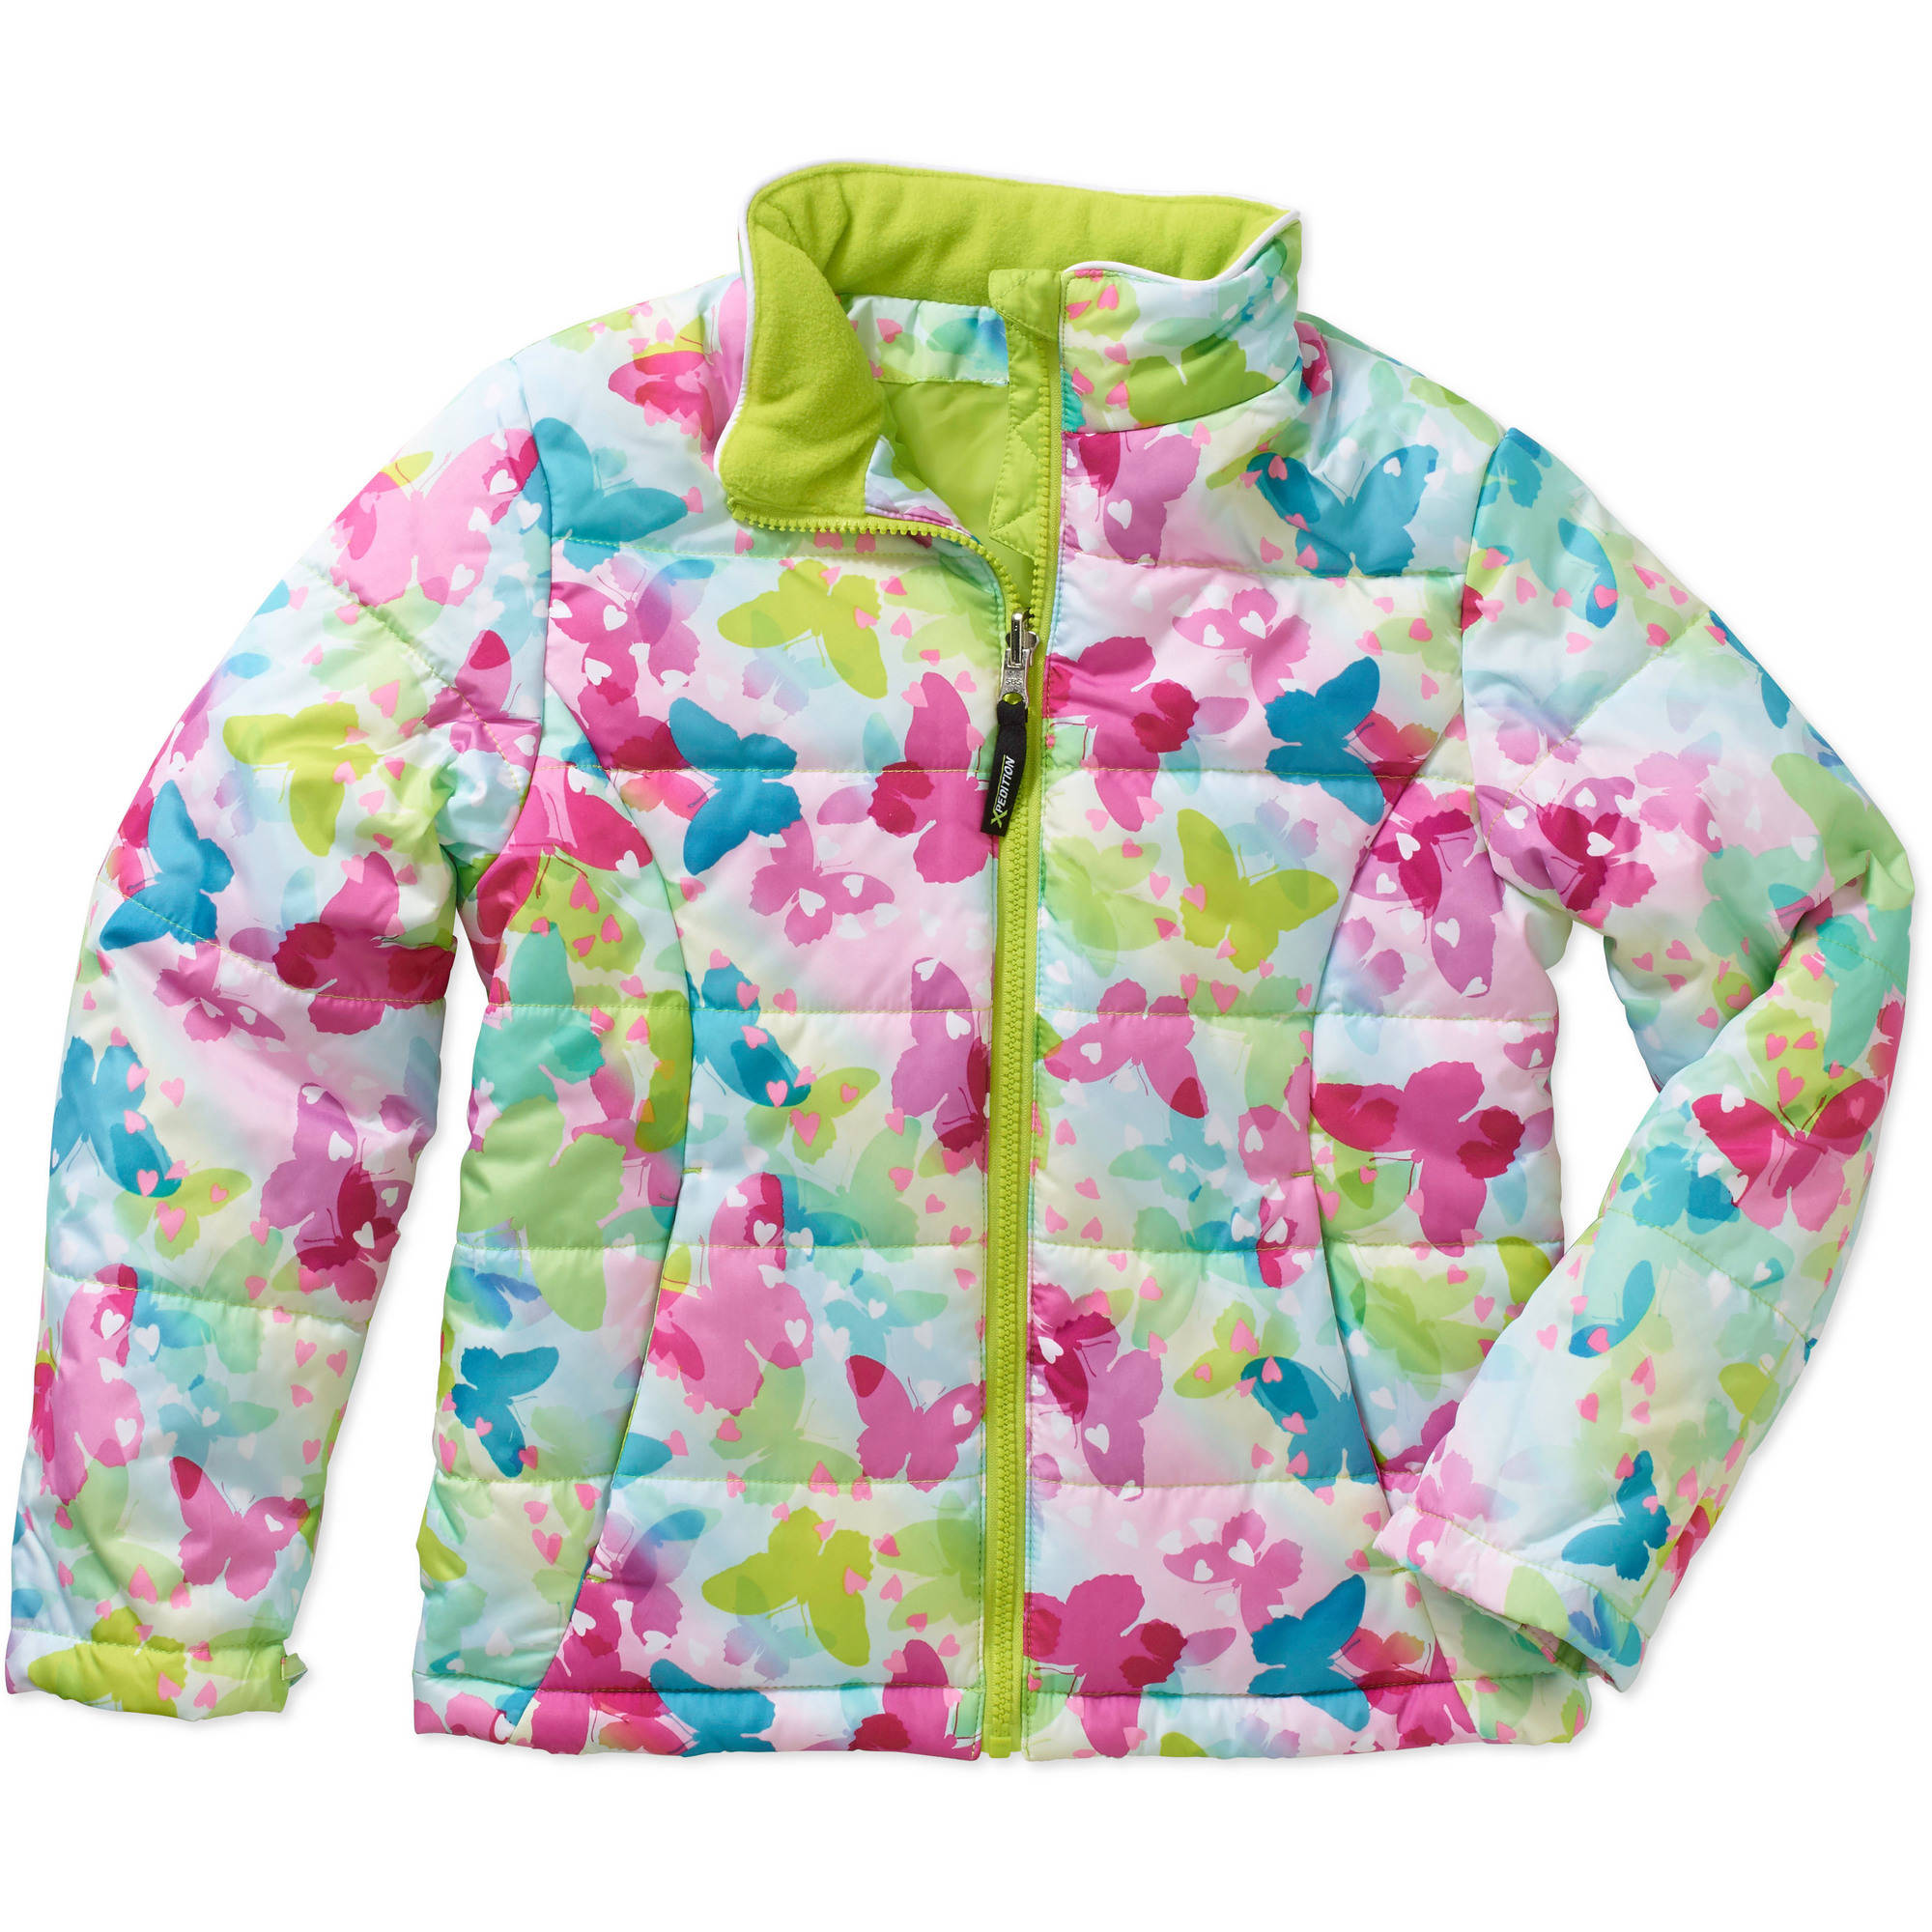 Girls' 3 in 1 Systems Jacket - image 2 of 2